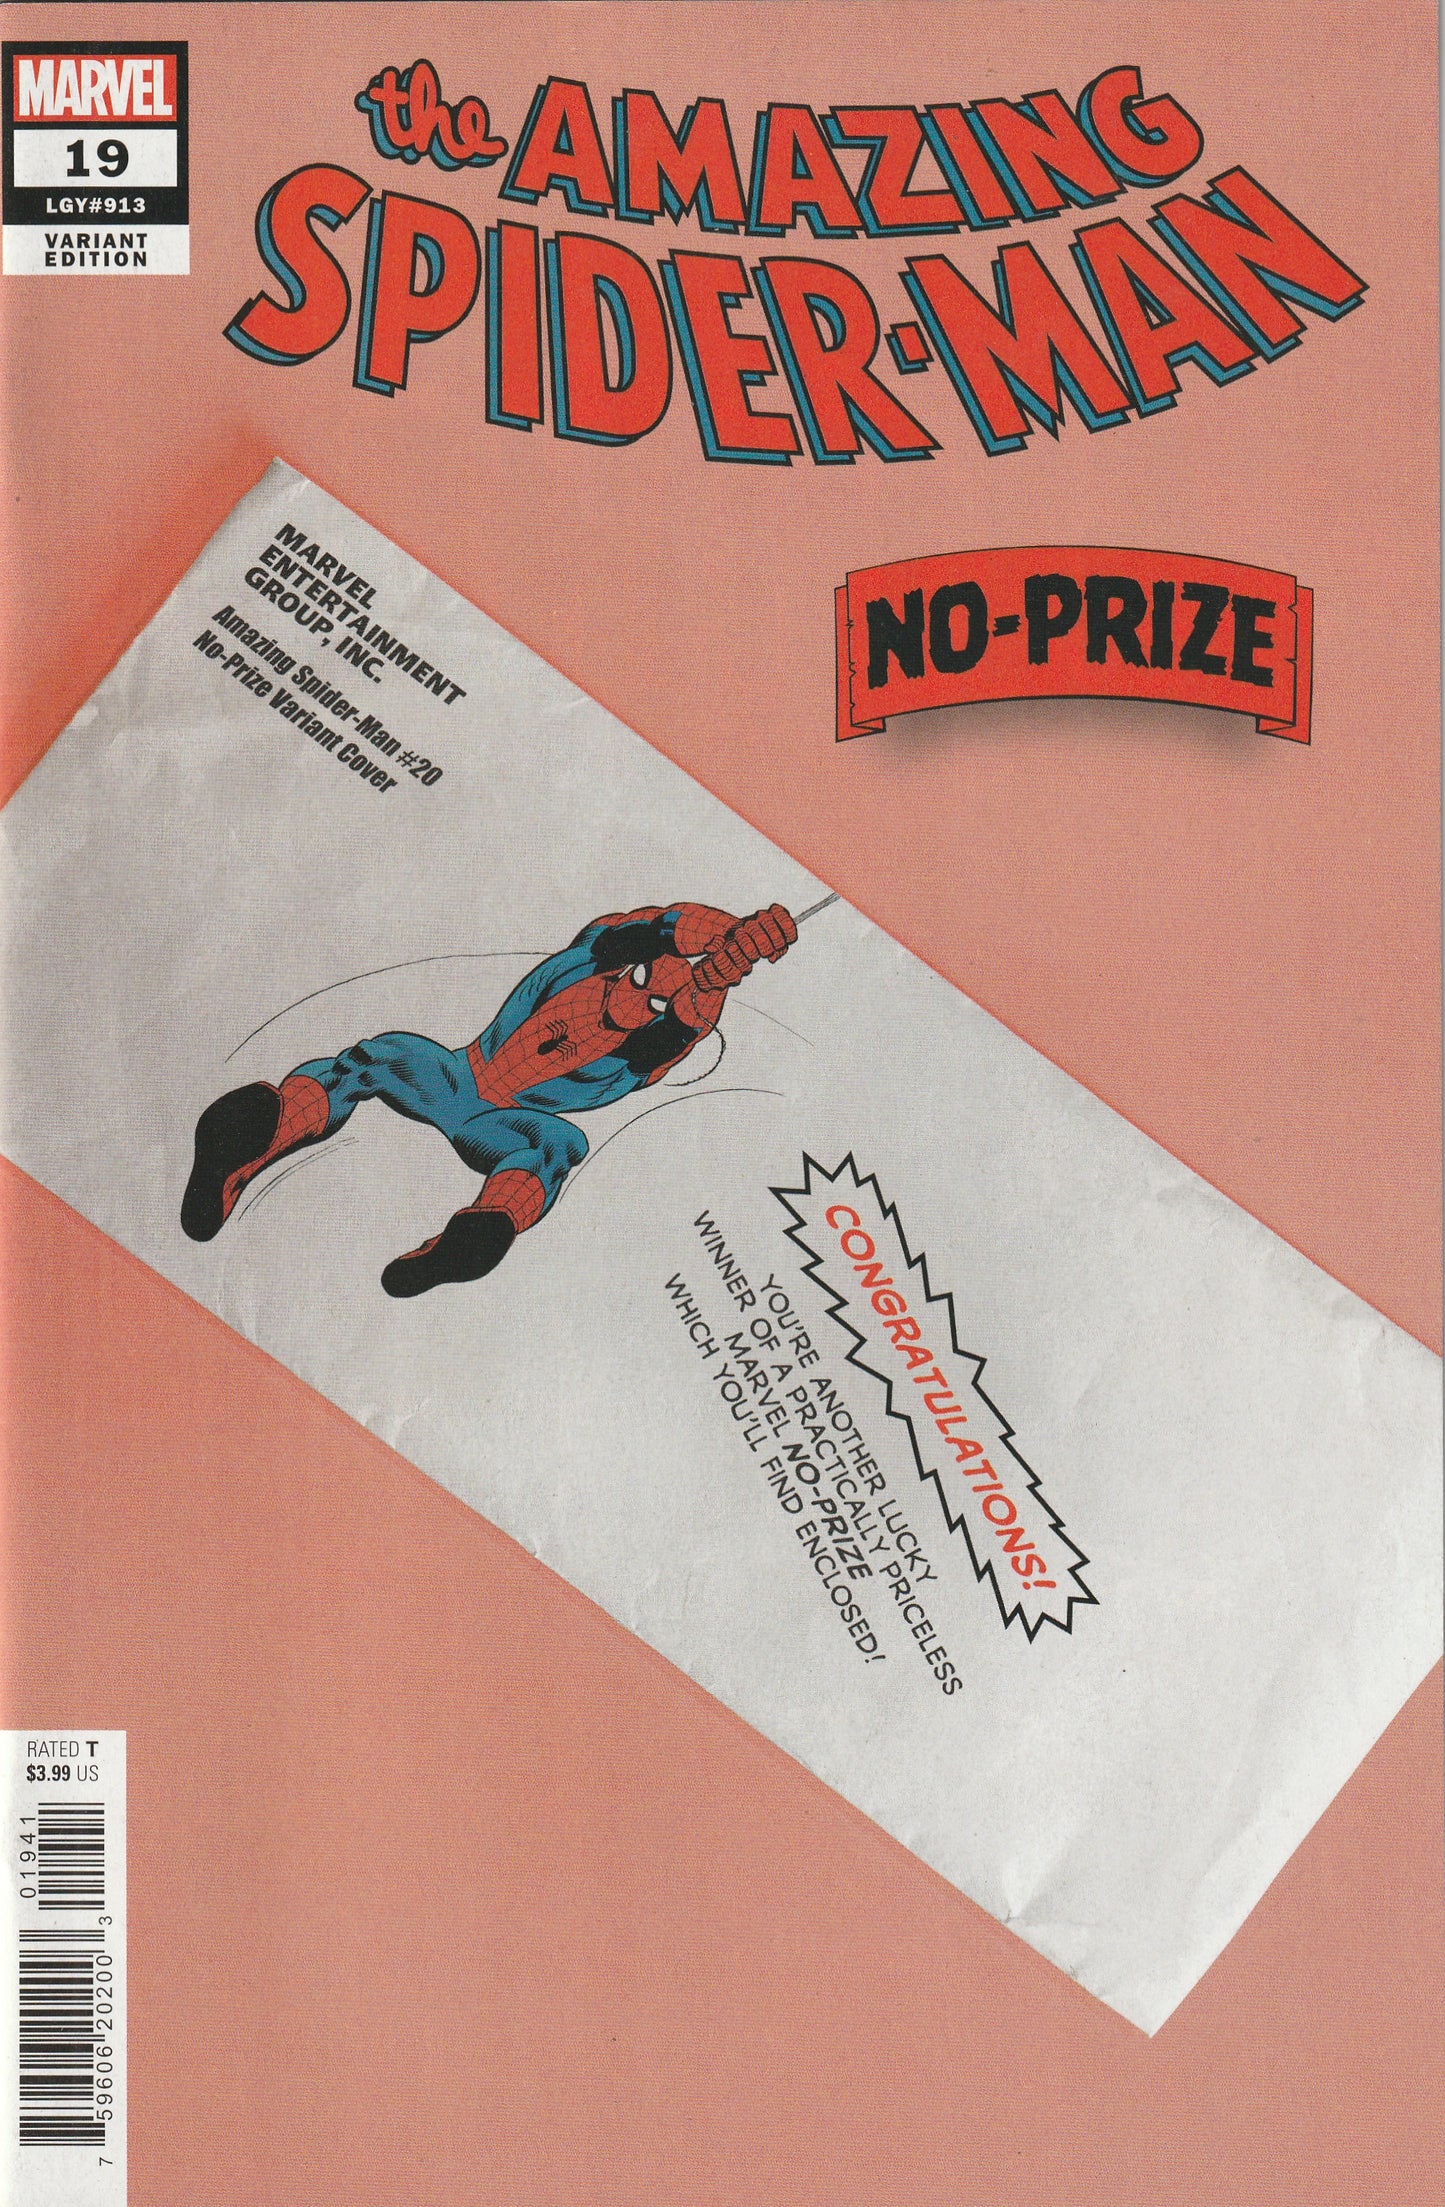 Amazing Spider-Man #19 (LGY #913) (2023) - Variant No Prize Cover